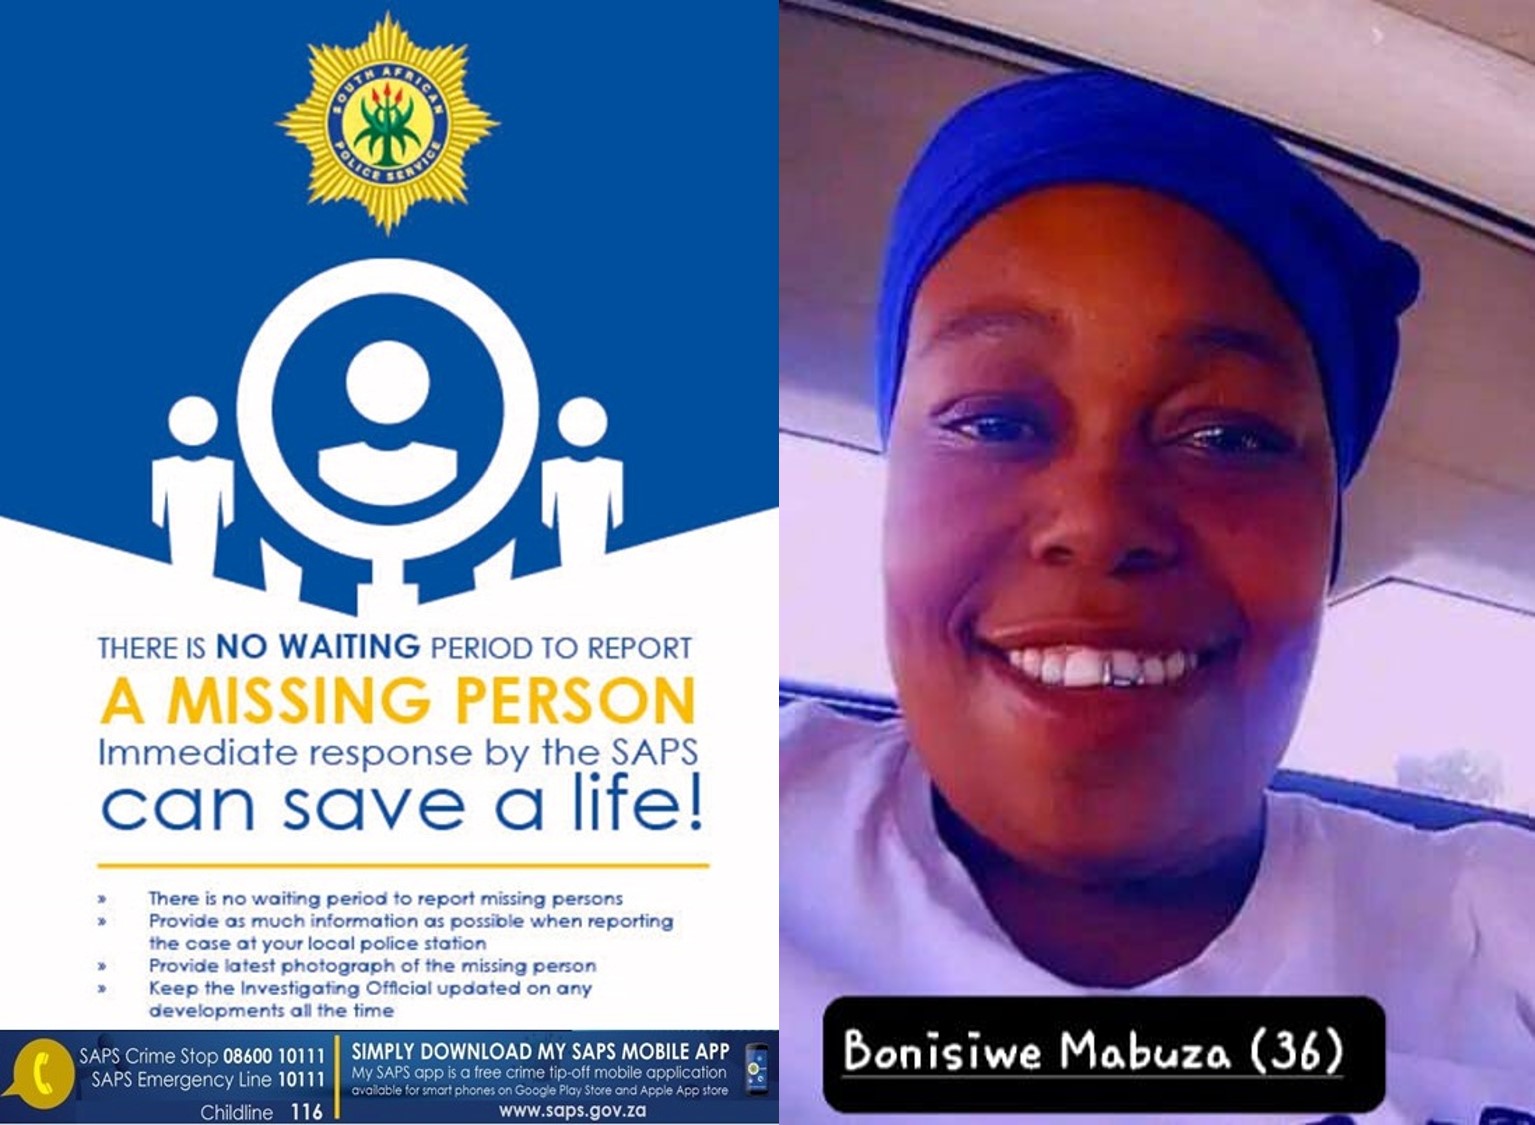 Public assistance needed in reuniting Bonisiwe Mabuza (36) with her family